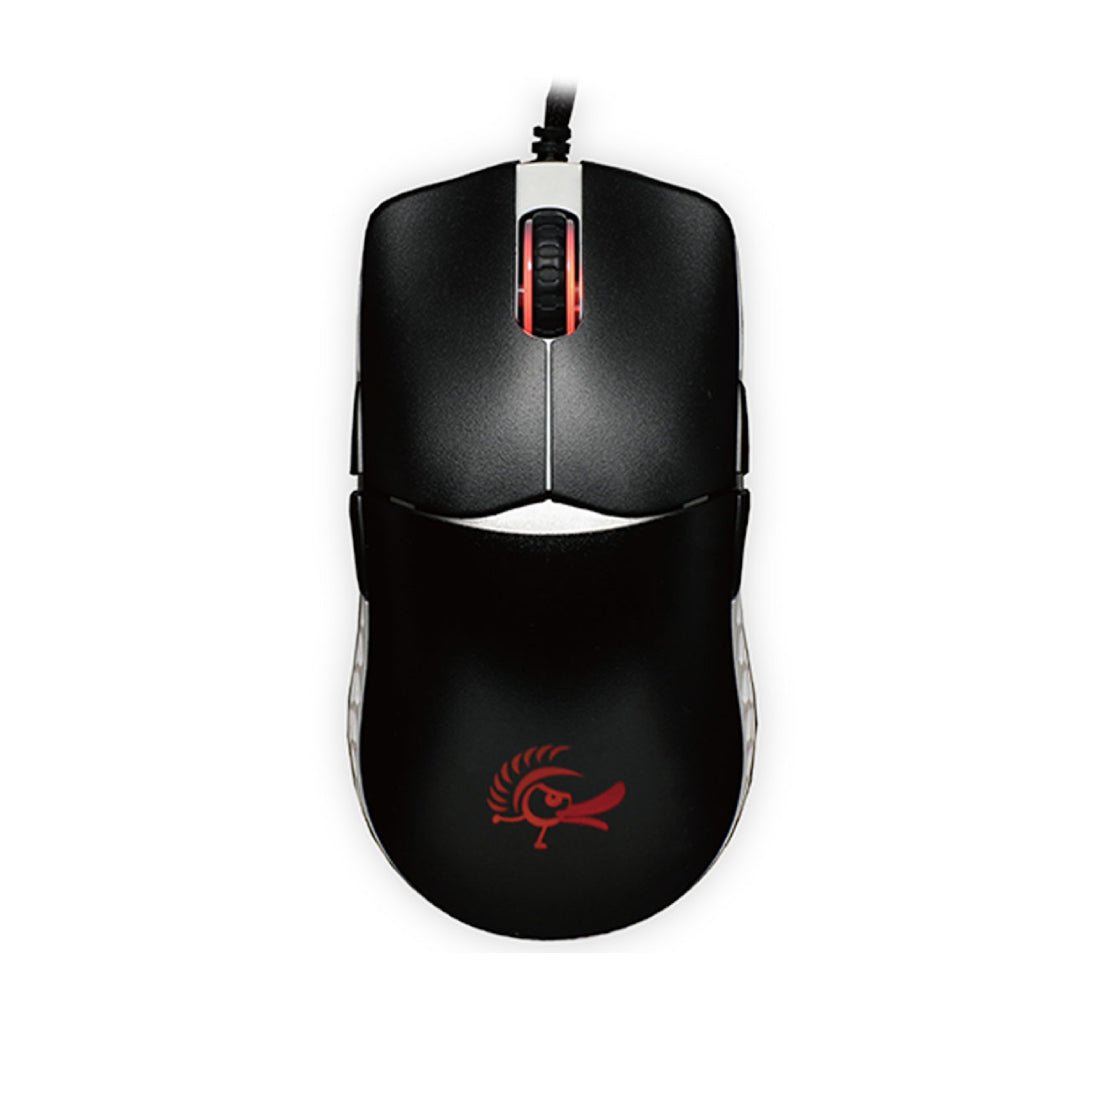 Ducky Feather Black & White Wired Gaming Mouse - Kailh - فأرة - Store 974 | ستور ٩٧٤